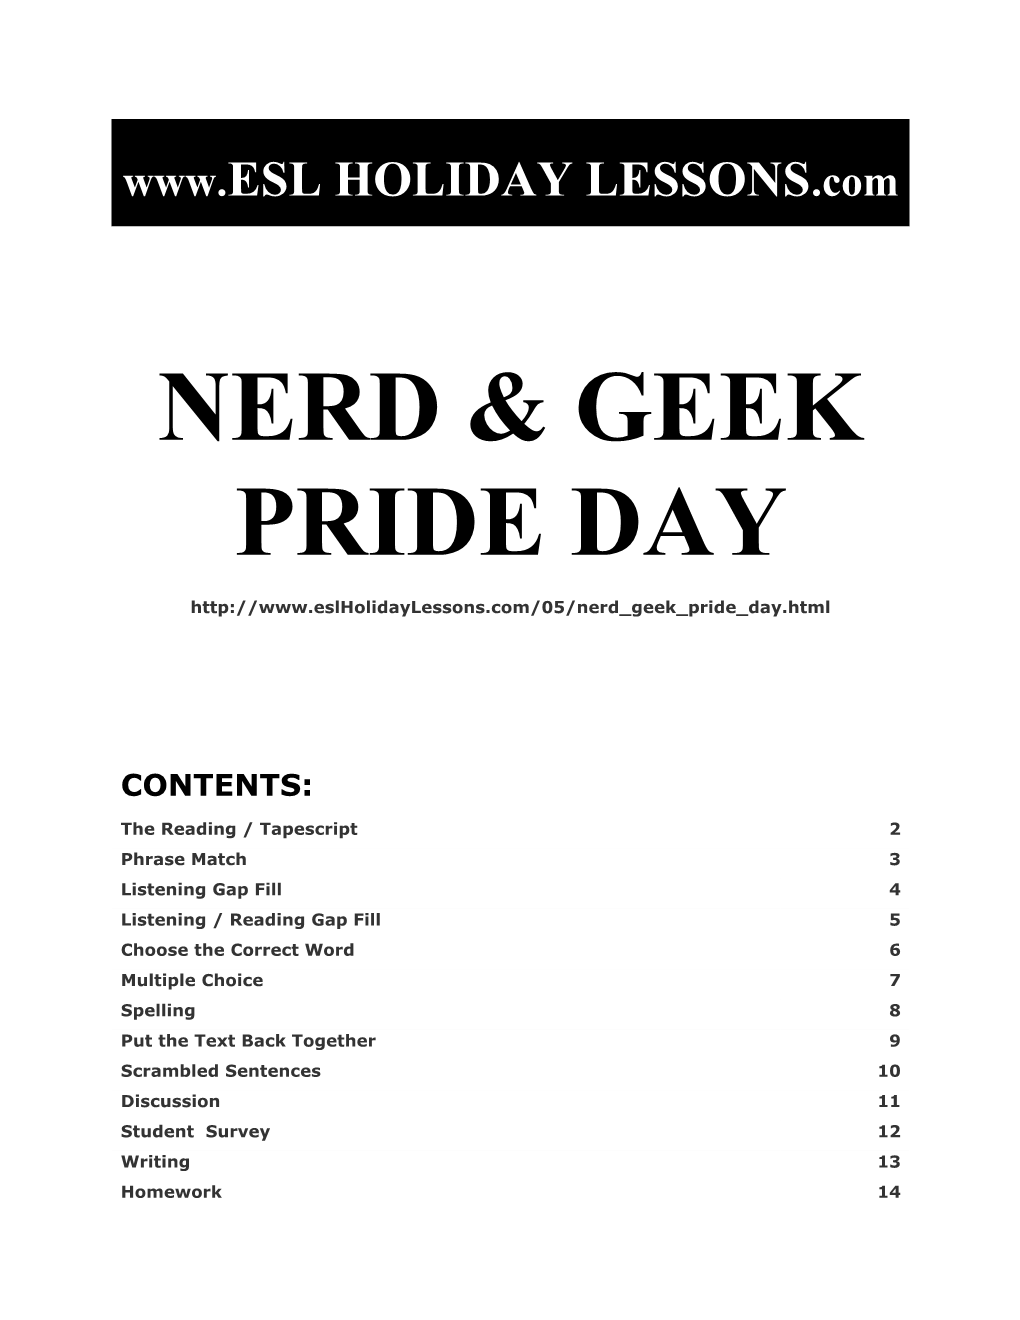 Holiday Lessons - Nerd & Geek Pride Day